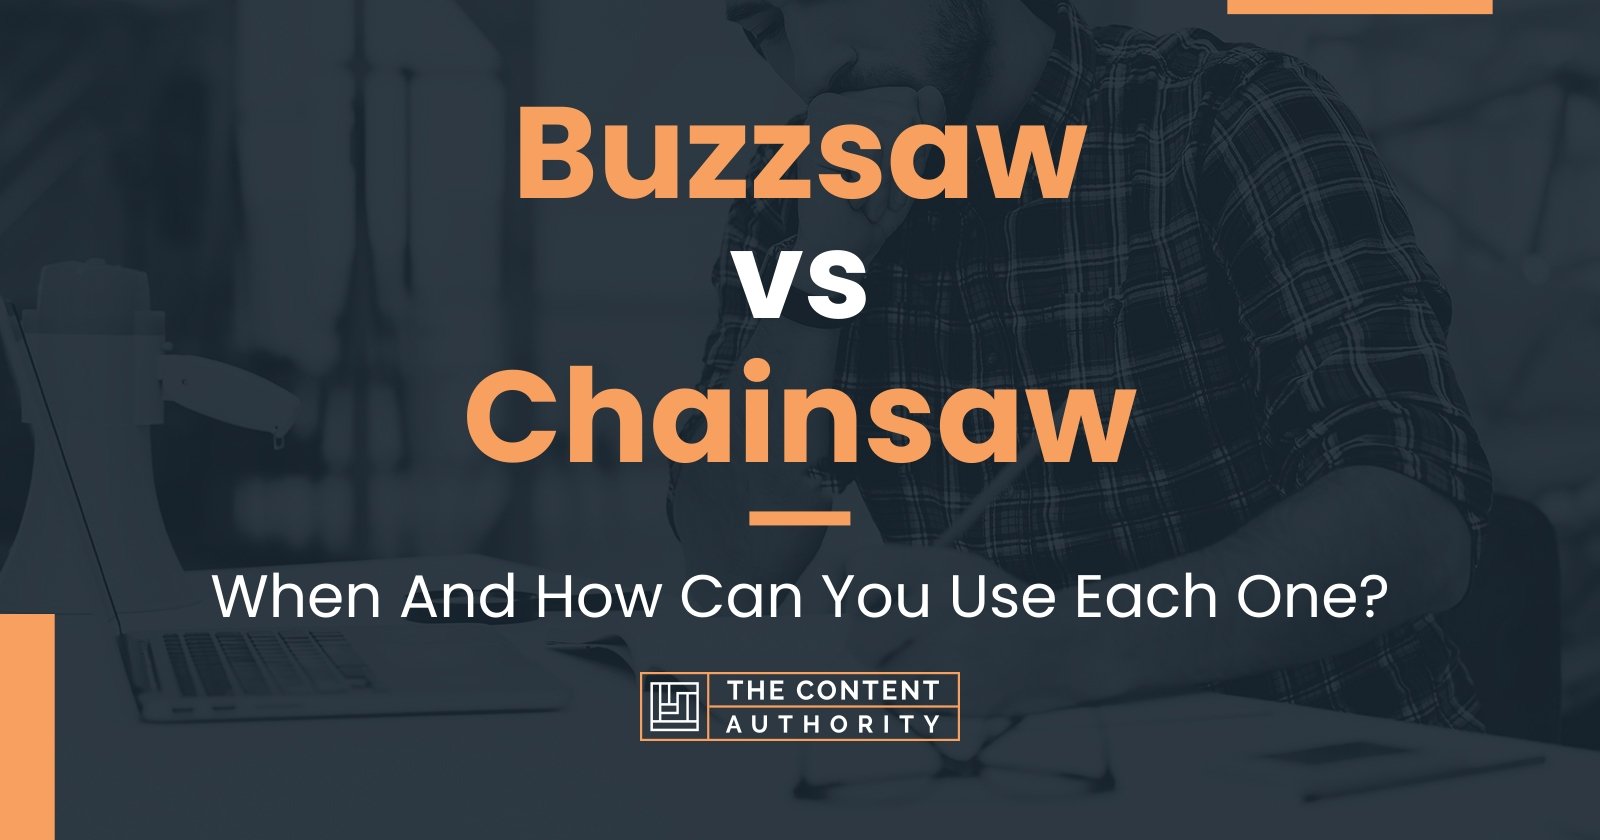 Buzzsaw vs Chainsaw: When And How Can You Use Each One?